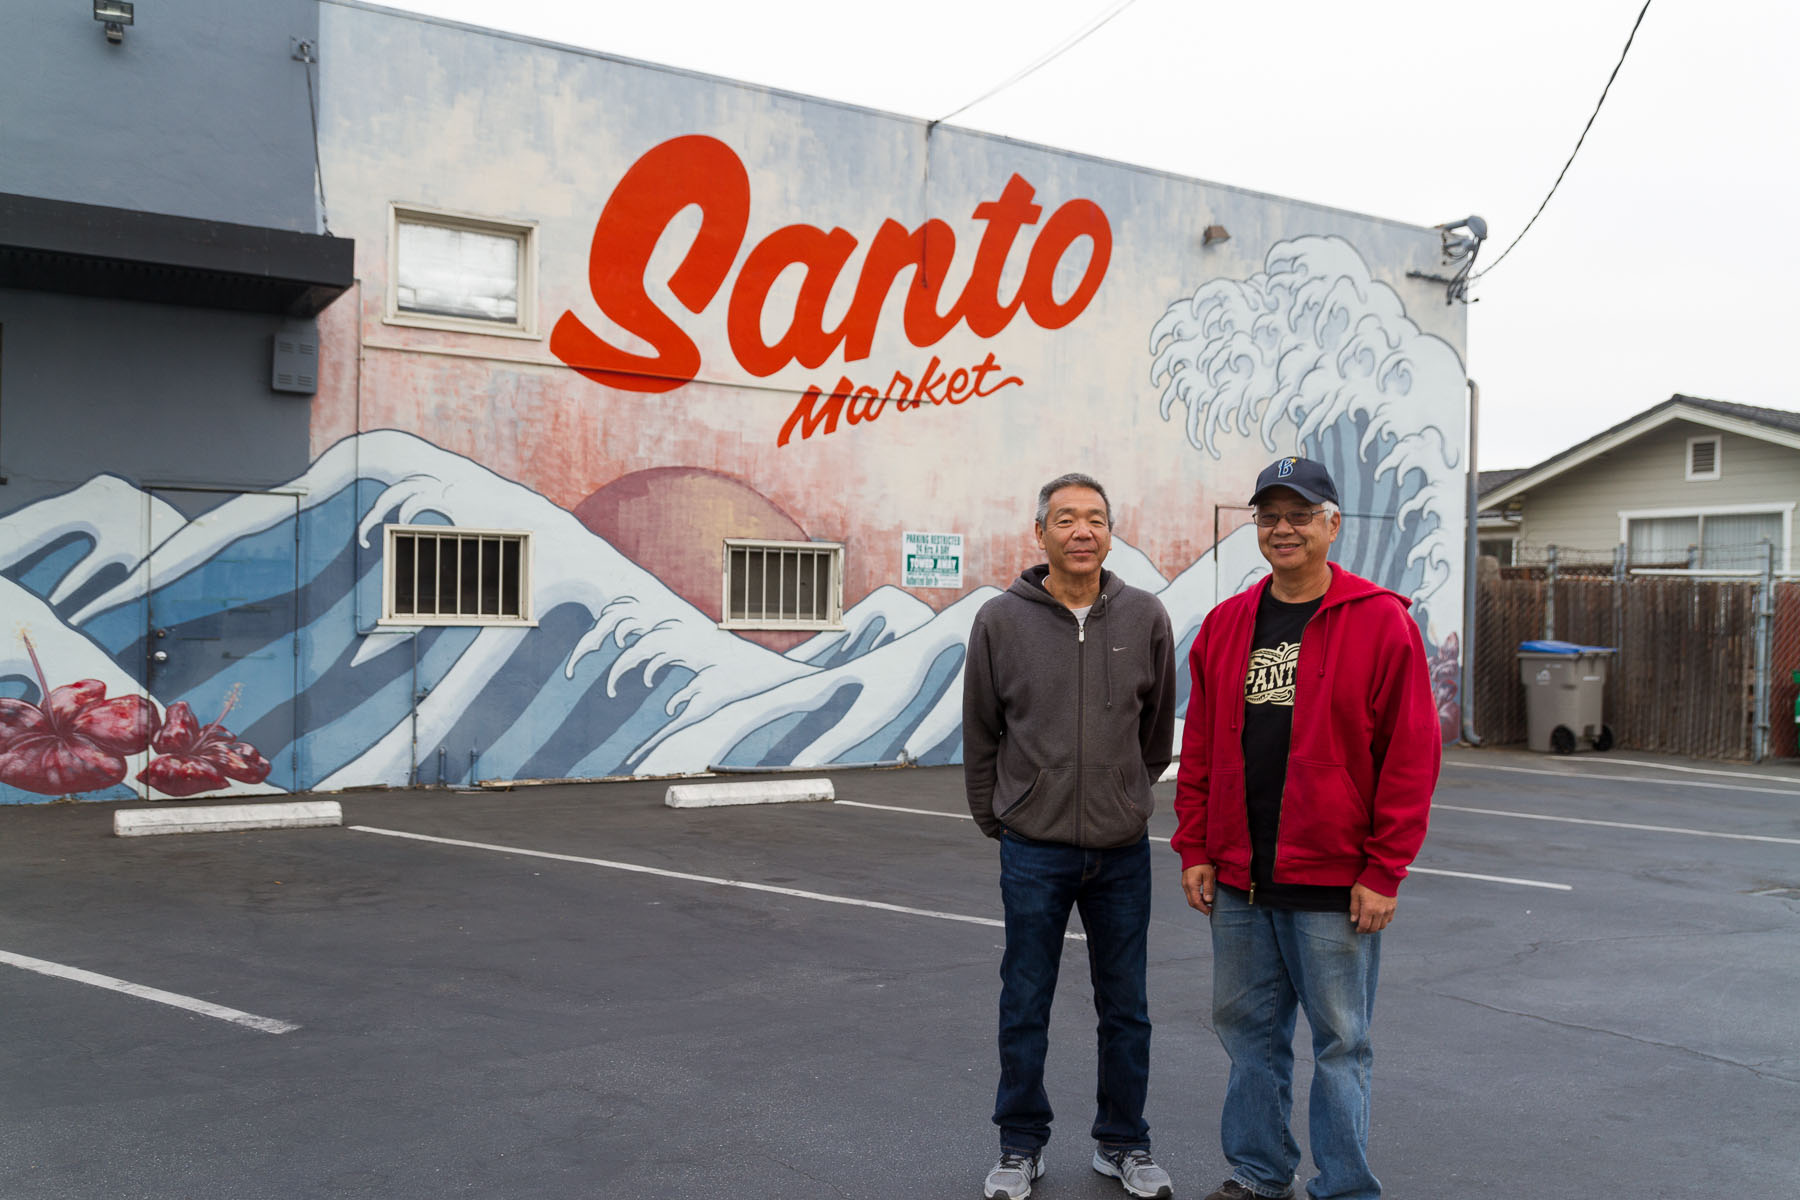 Two men stand in front of a large, ocean-themed mural on the exterior wall of Santo Market.